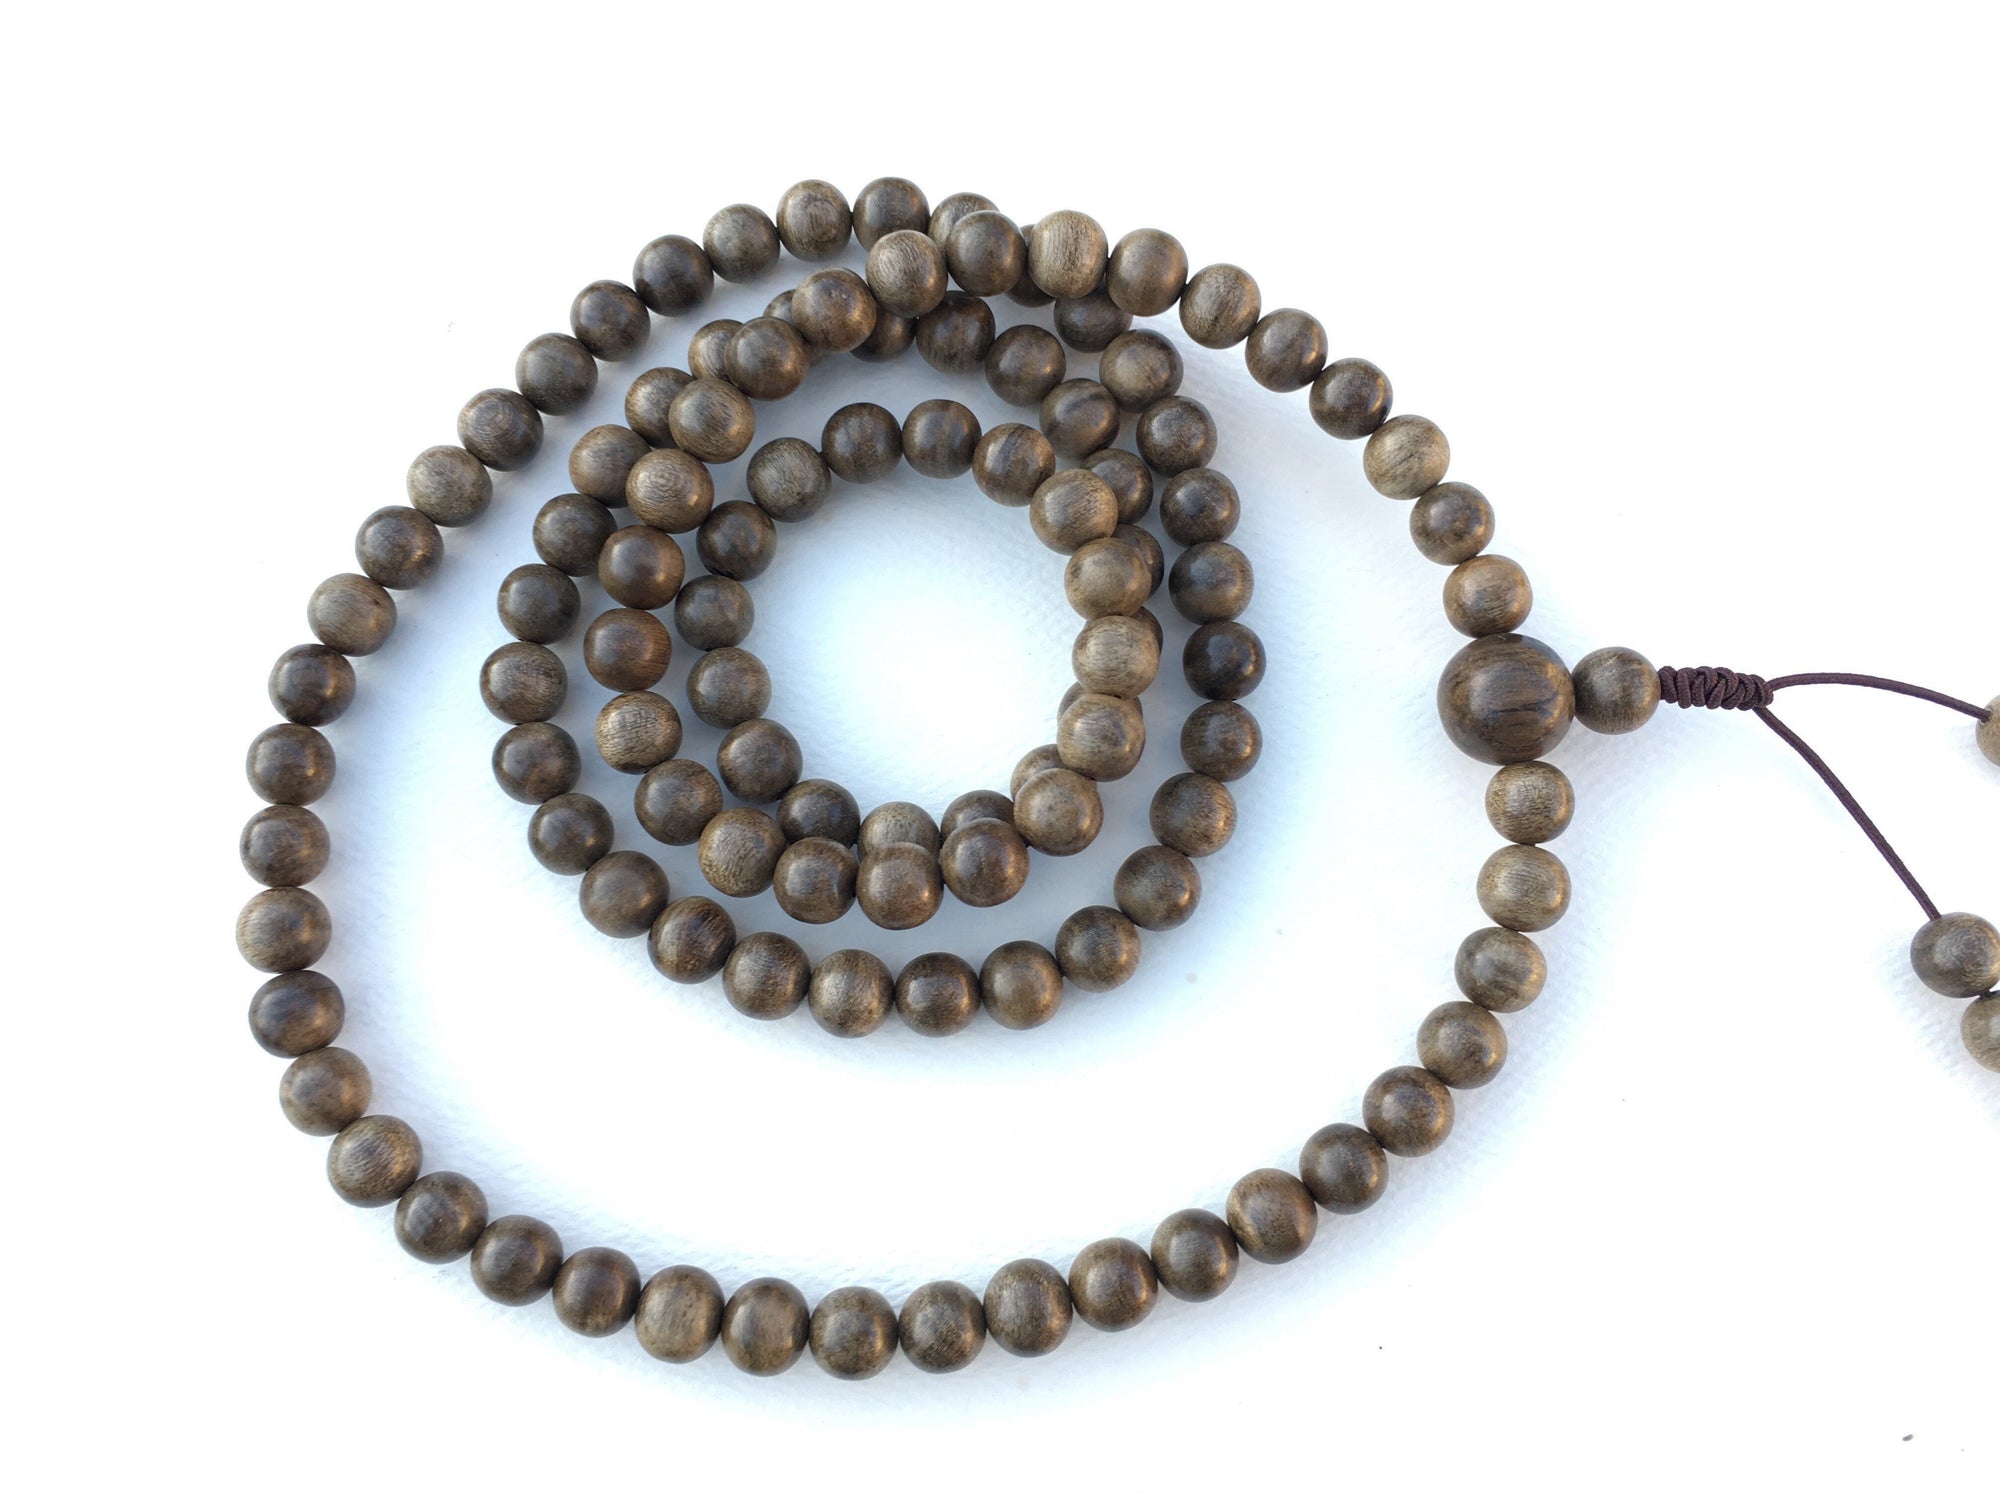 ZZ-SOLD OUT-ZZ- Preorder The Flawless Wild 108 agarwood mala beads -